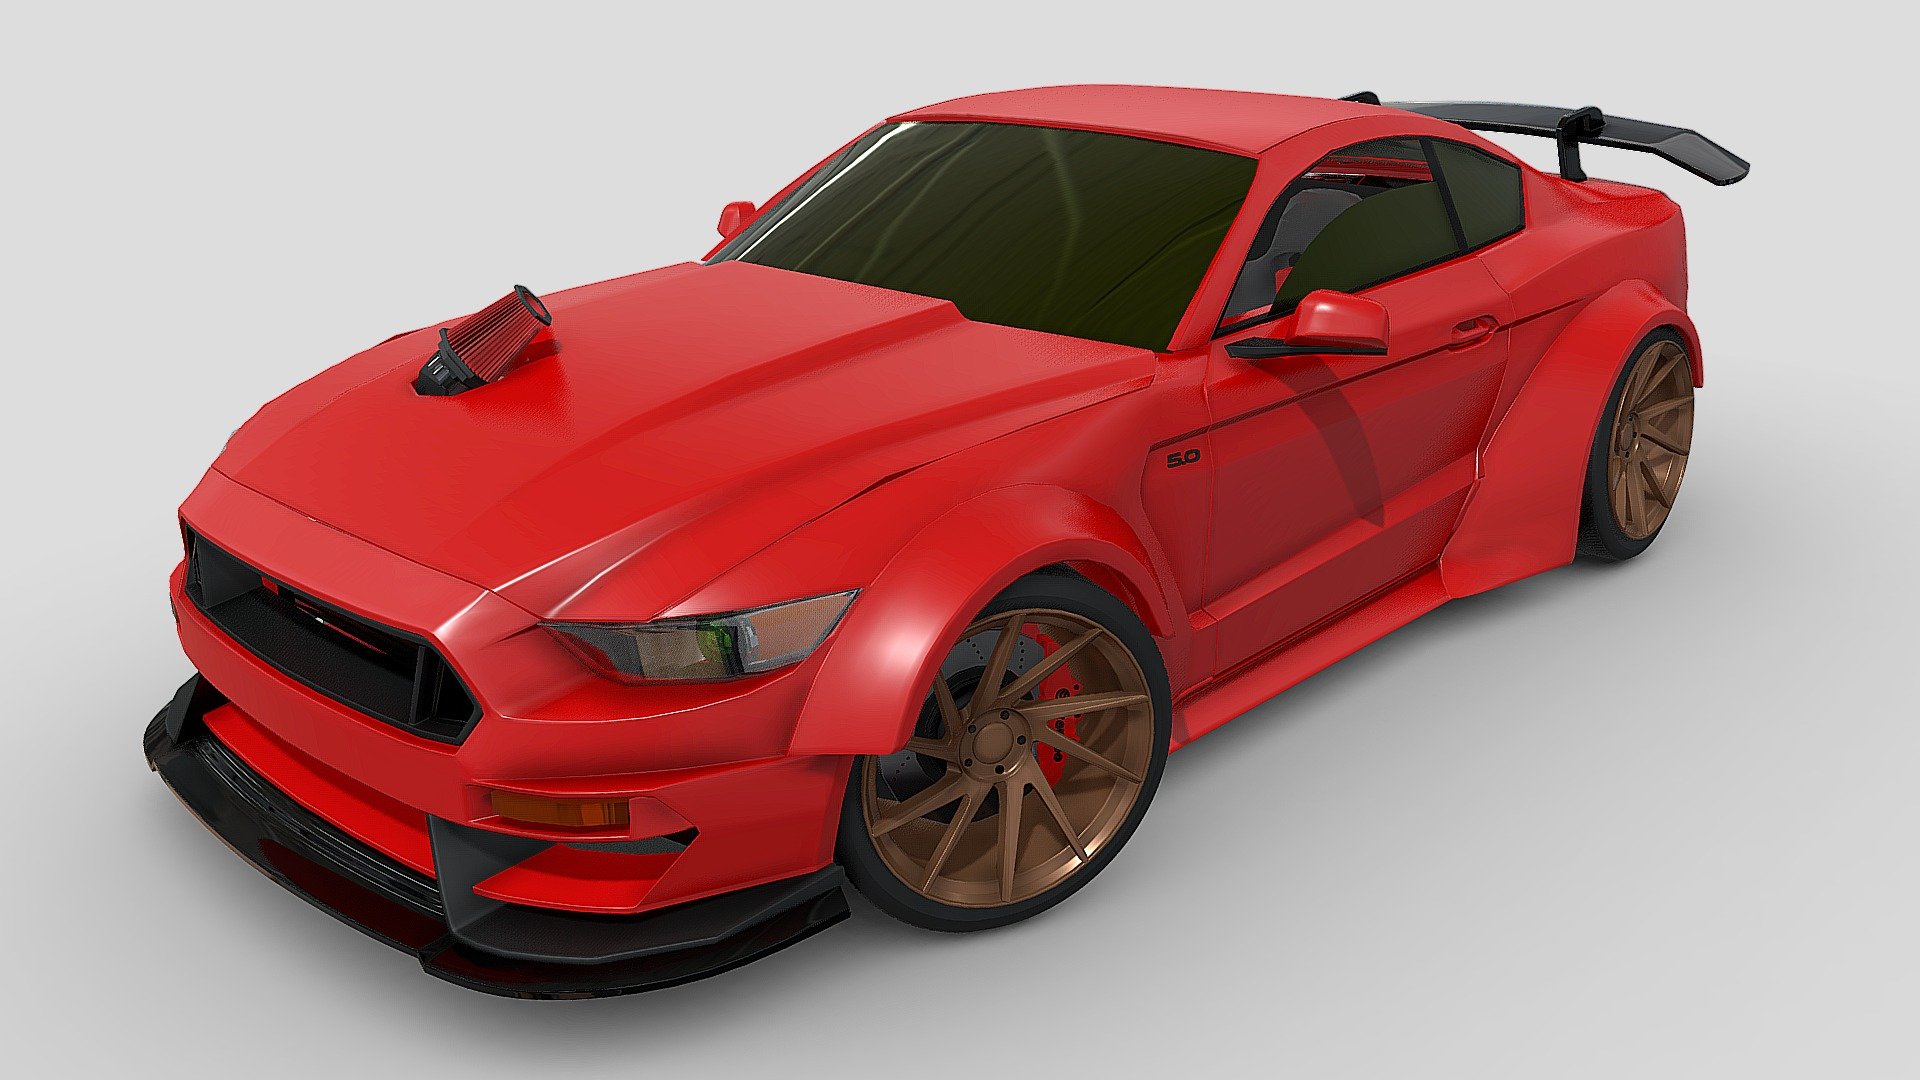 This is a Ford Mustang GT  ( LIBERTY WALK ) . This asset was modelled in maya and textured in Substance painter. To see more Work please visit my instagram profile : https://www.instagram.com/art.rajat/?hl=en Stay tuned for more exciting upcoming 3D models .... &amp; feel free to suggest what you want to get next 3d model